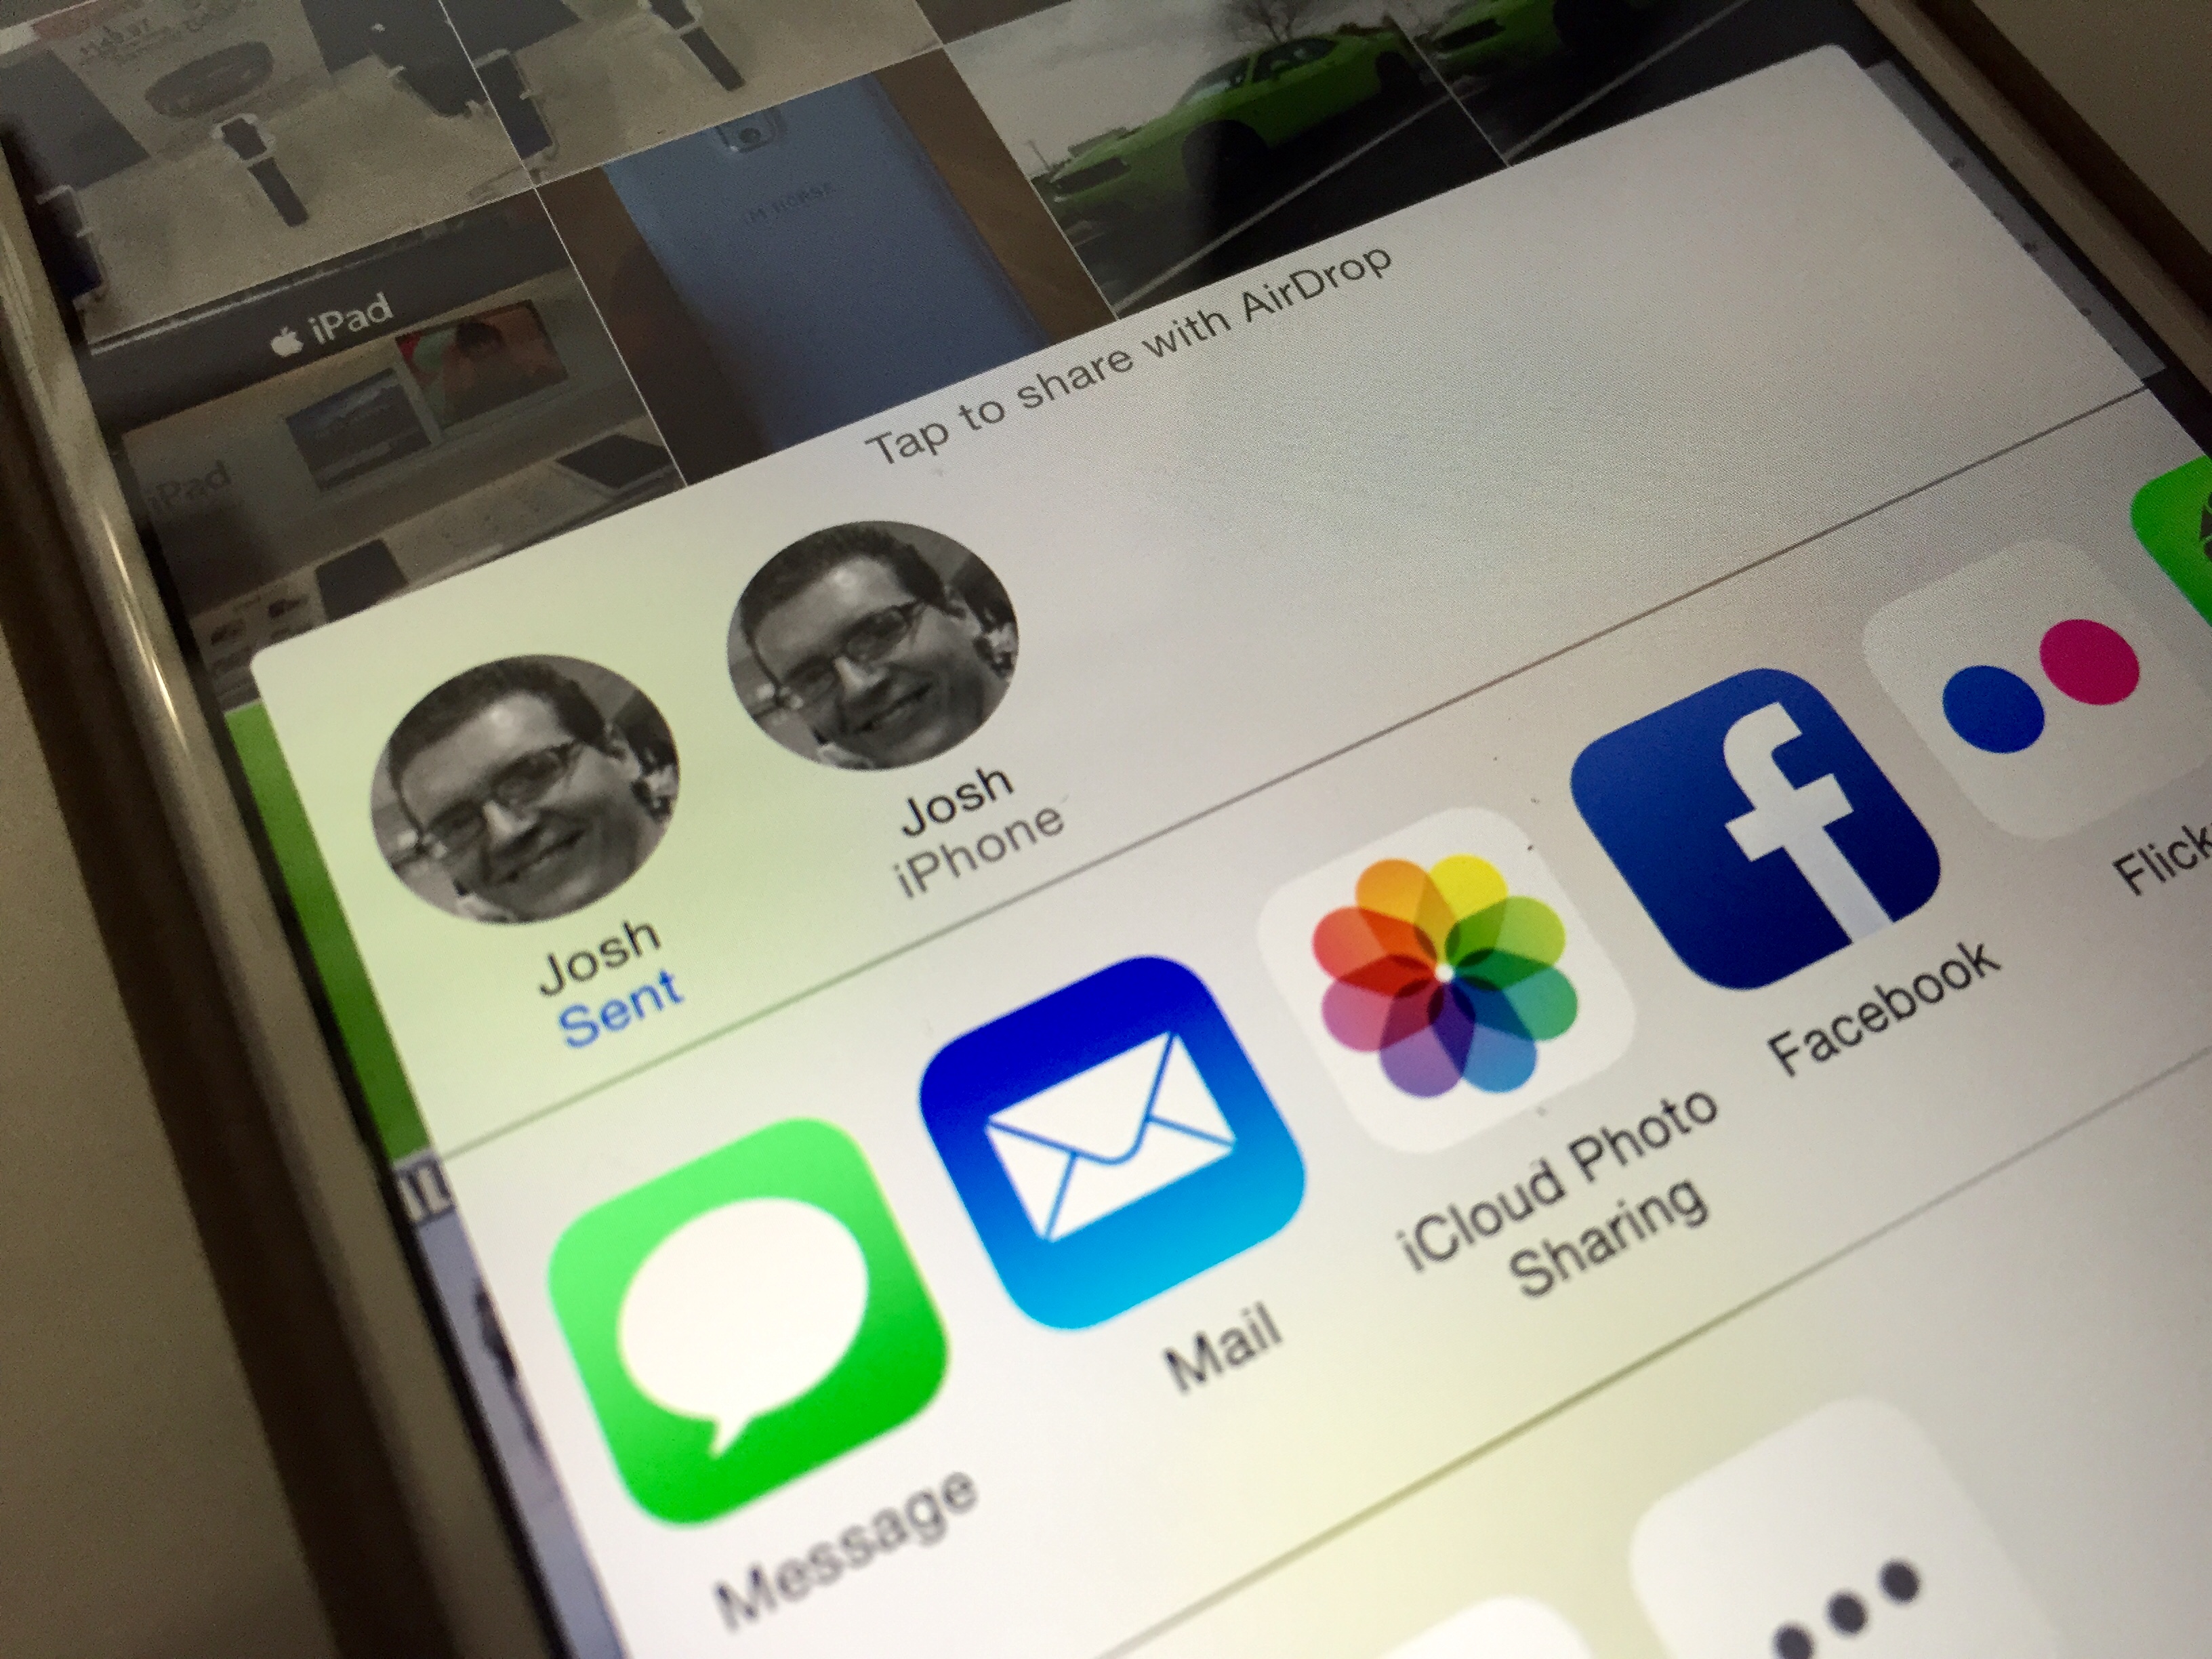 Learn how to use AirDrop on IOS 8 and OS X Yosemite.